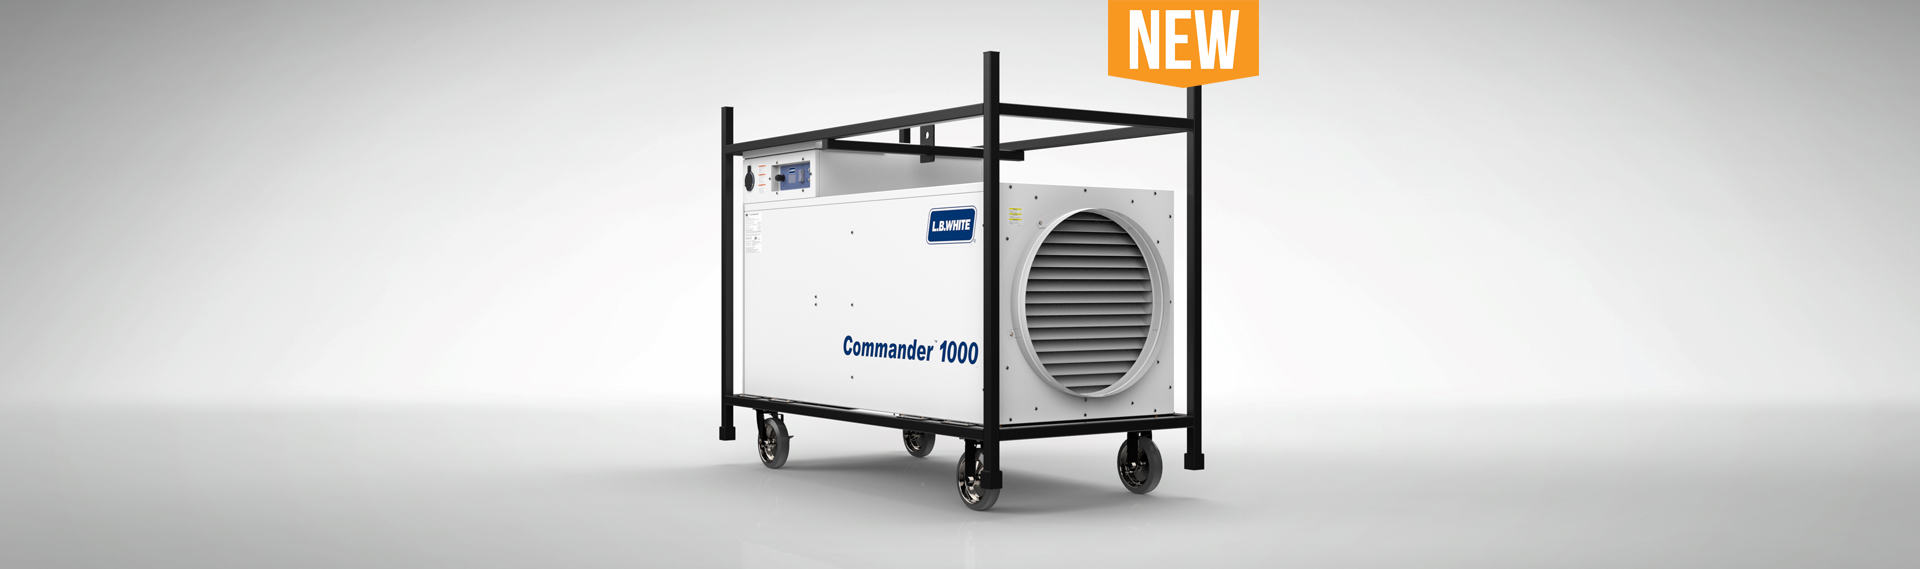 The Commander™ Make-Up Air Units manage air conditions in worksites where improved air quality, temperature control, and moisture reduction is a necessity.